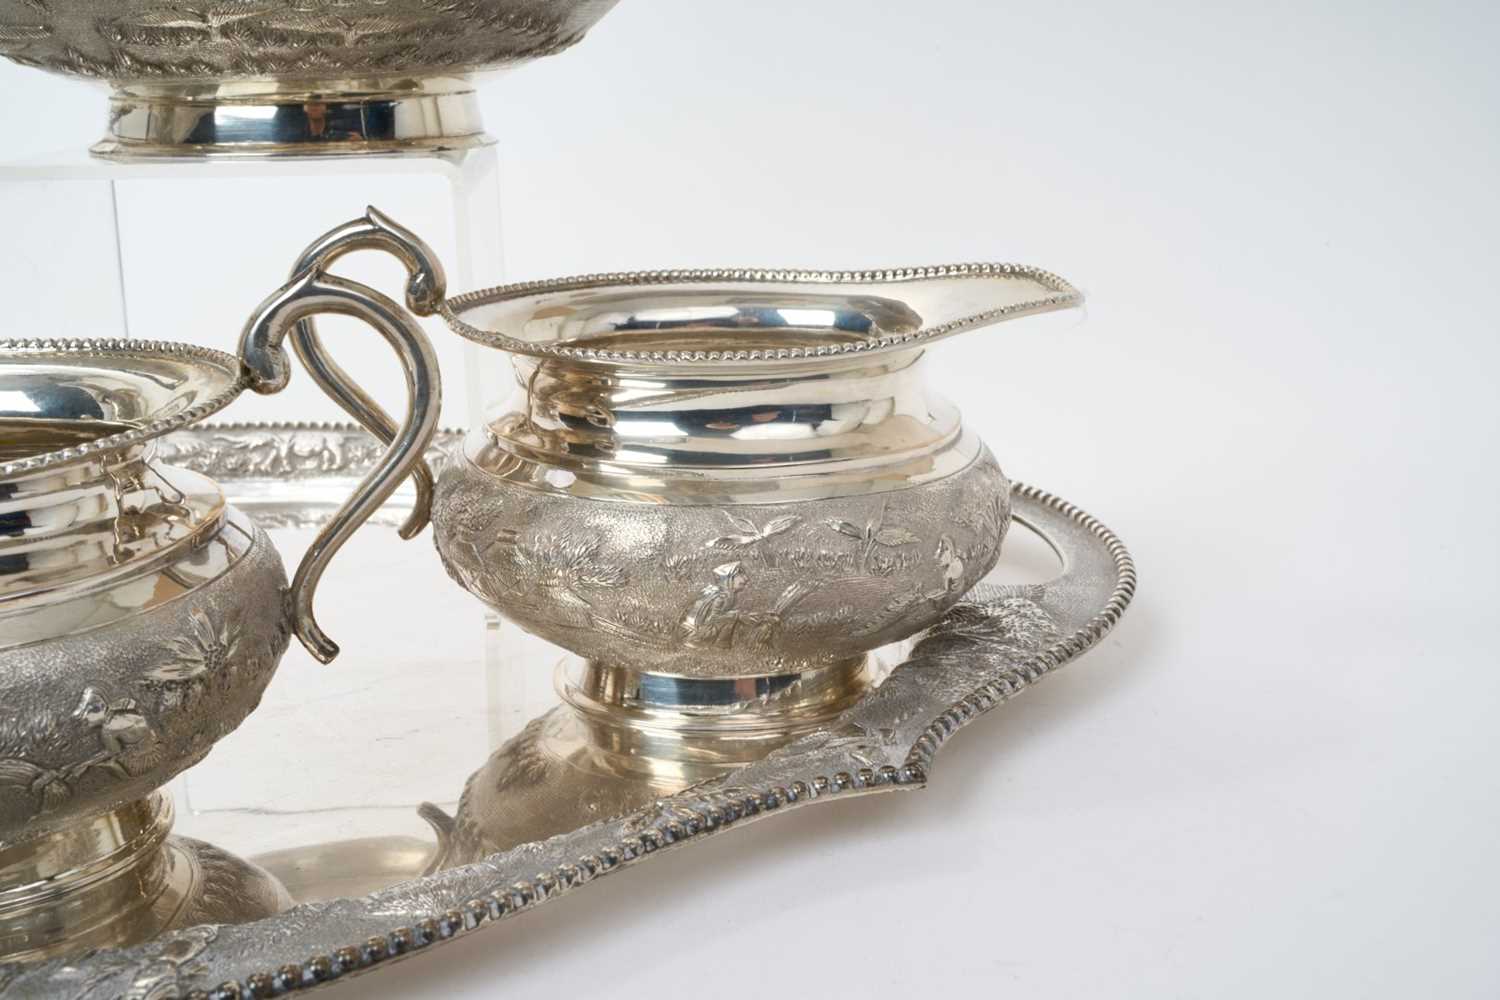 Indian silver four piece teaset together with a matching tray - Image 4 of 8